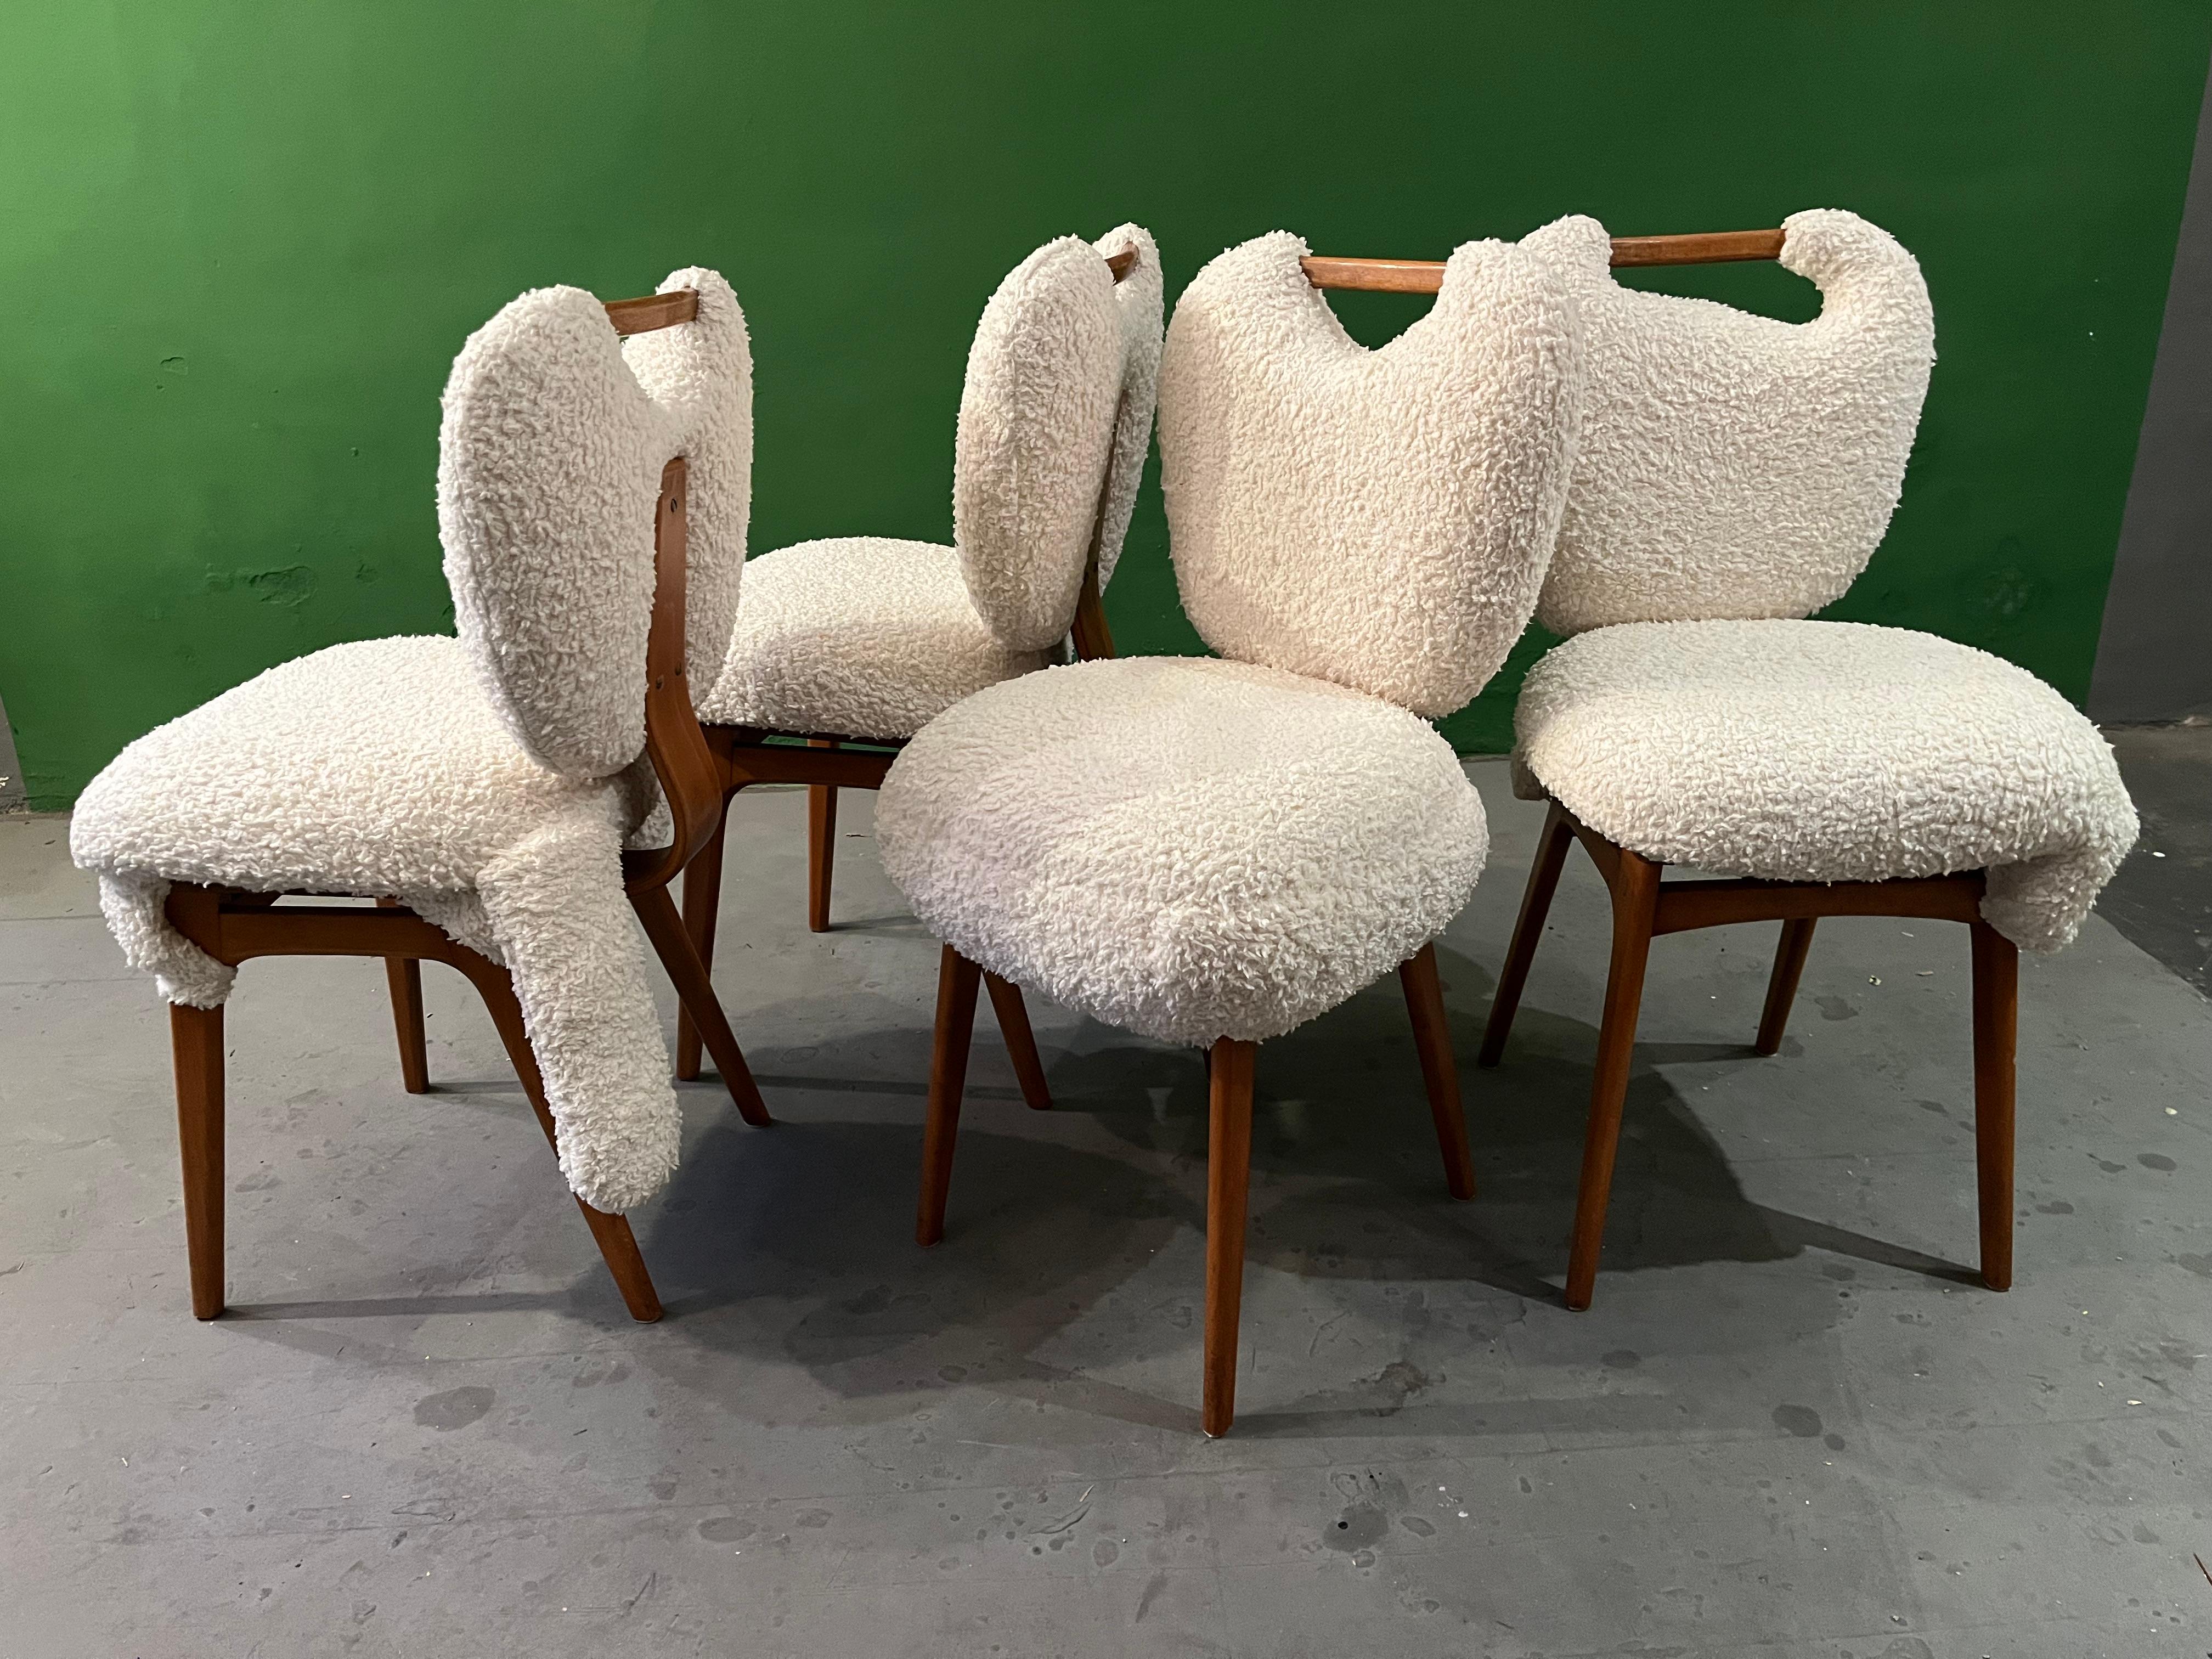 Teddy Chairs by Markus Friedrich Staab/ Contemporized For Sale 9